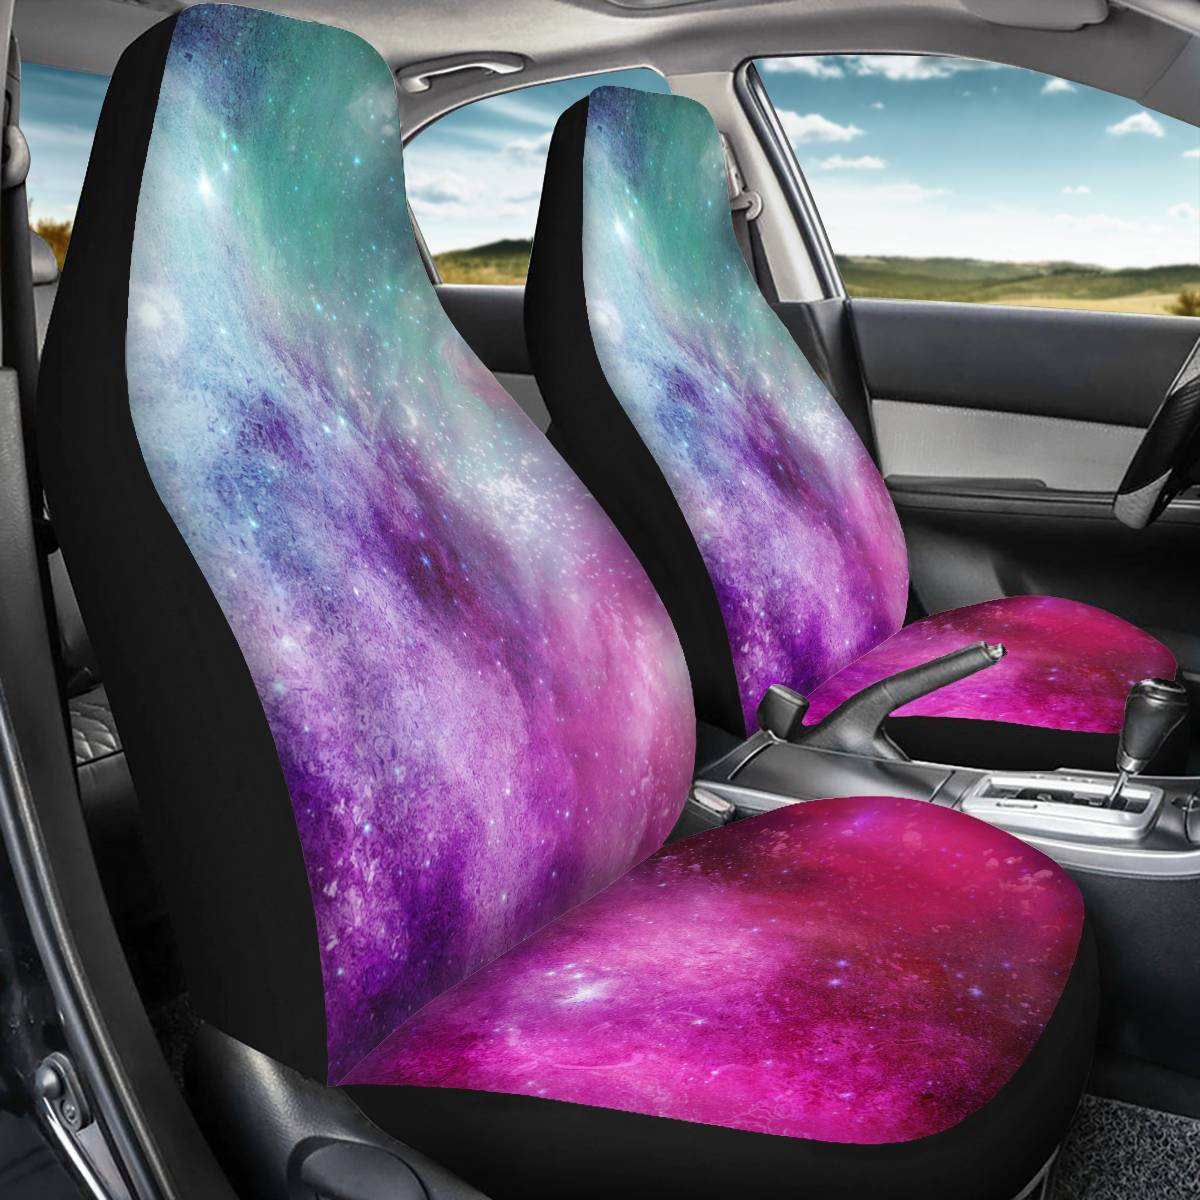 2 Pieces Wearproof Dirt-proof Easy to Clean Front Single Car Seat Covers Galaxy Summer Cooling Four Seasons Car Seat Covers for Front Two Seats Comes with 2 Pieces - Honeycomb Cloth